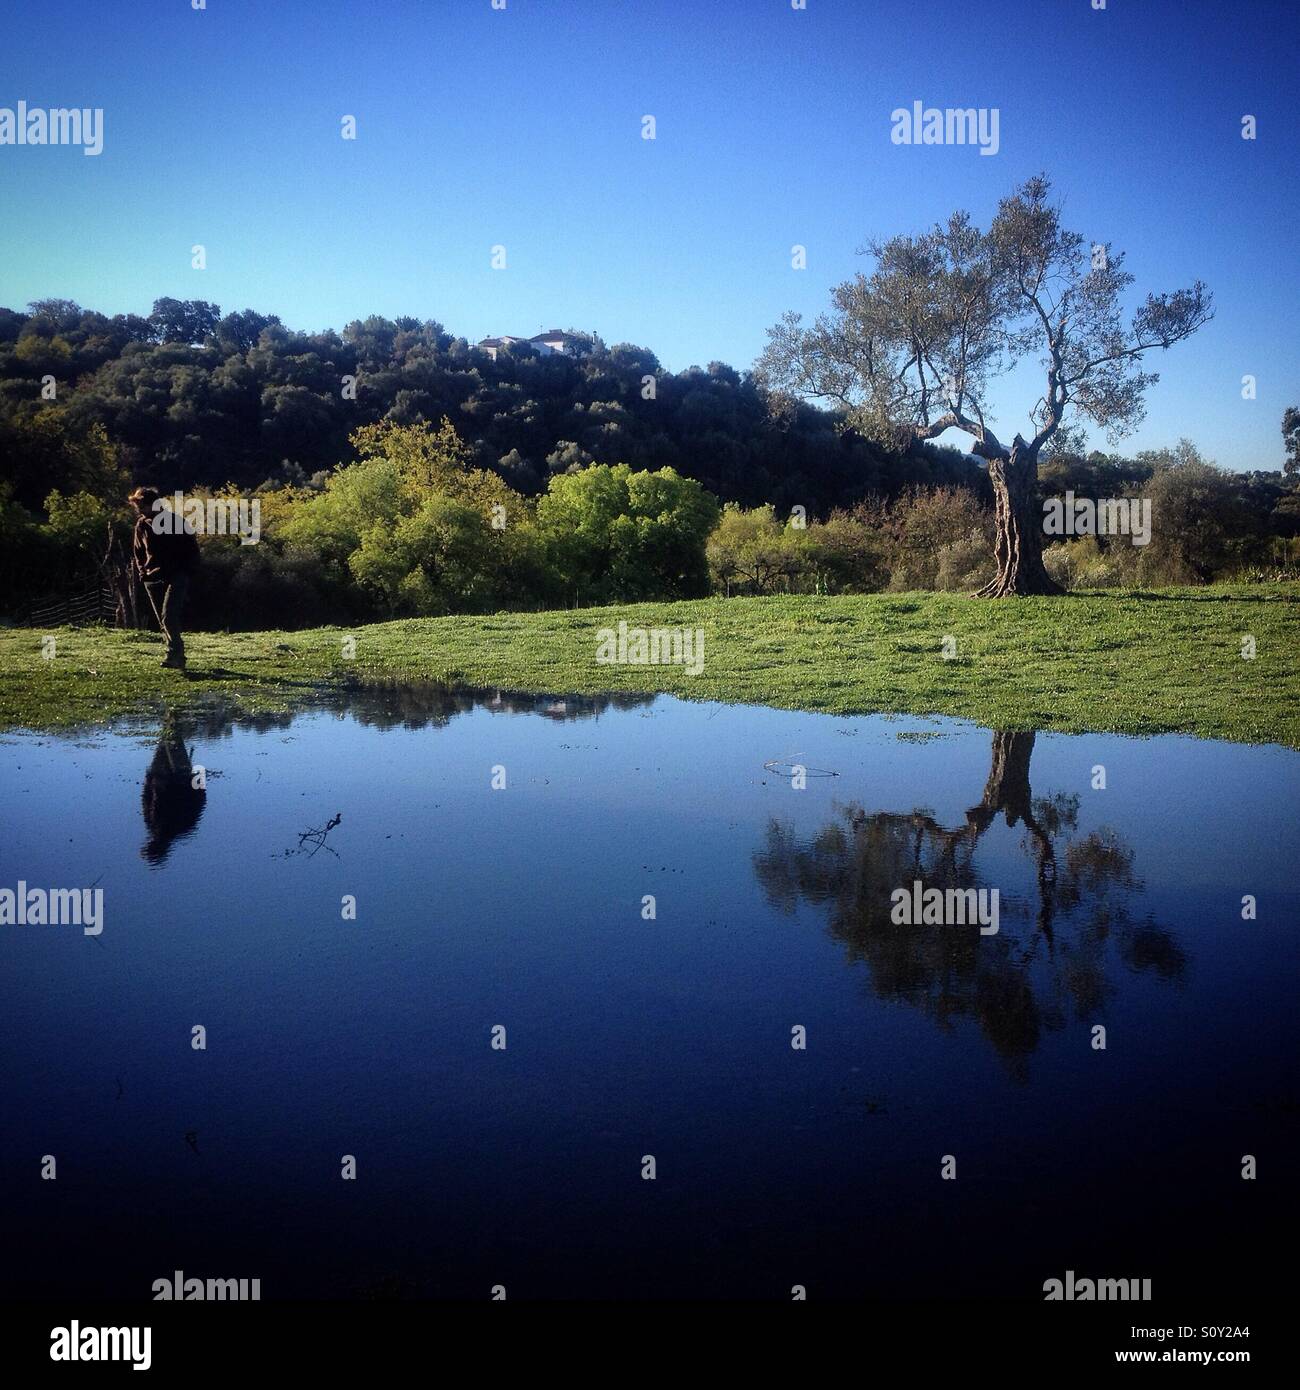 Reflection of a tree and a farmer in the water in the olive orchard of O-Live Medioambiente Association in Prado del Rey, Sierra de Cadiz, Andalusia, Spain Stock Photo